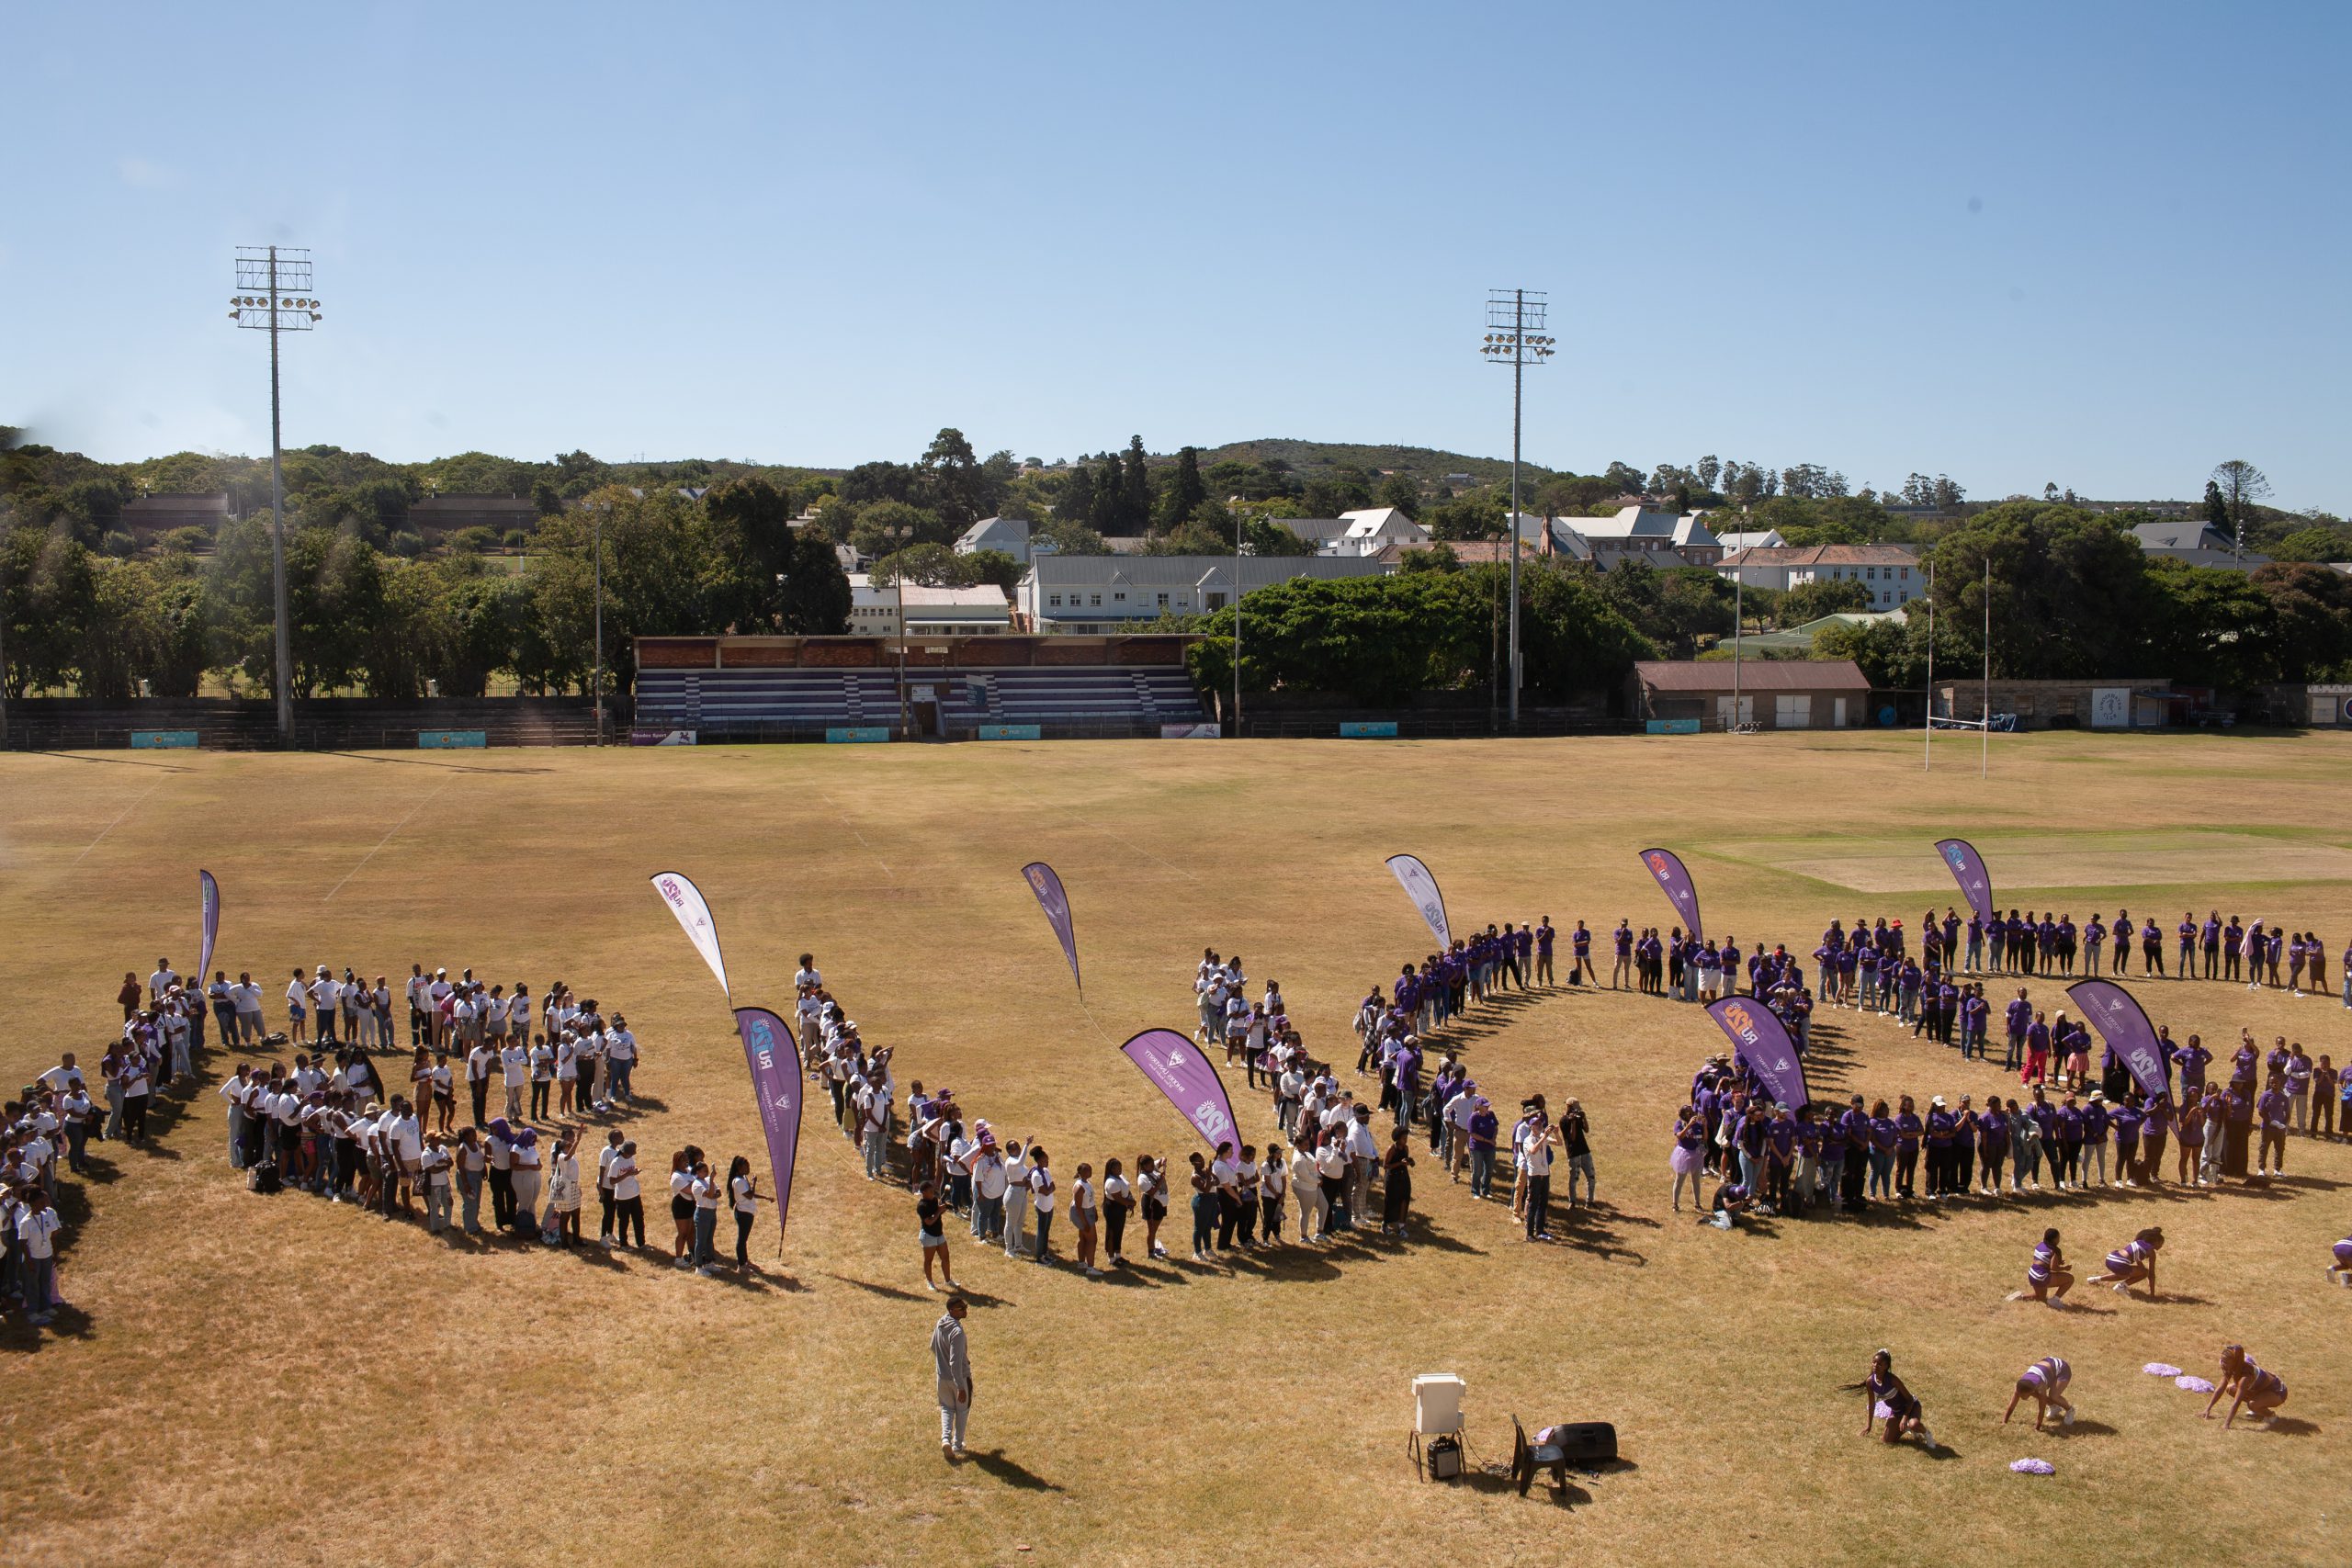 Rhodes university staff and students lining up for the RU120 formation. Photo: Rikie Lai